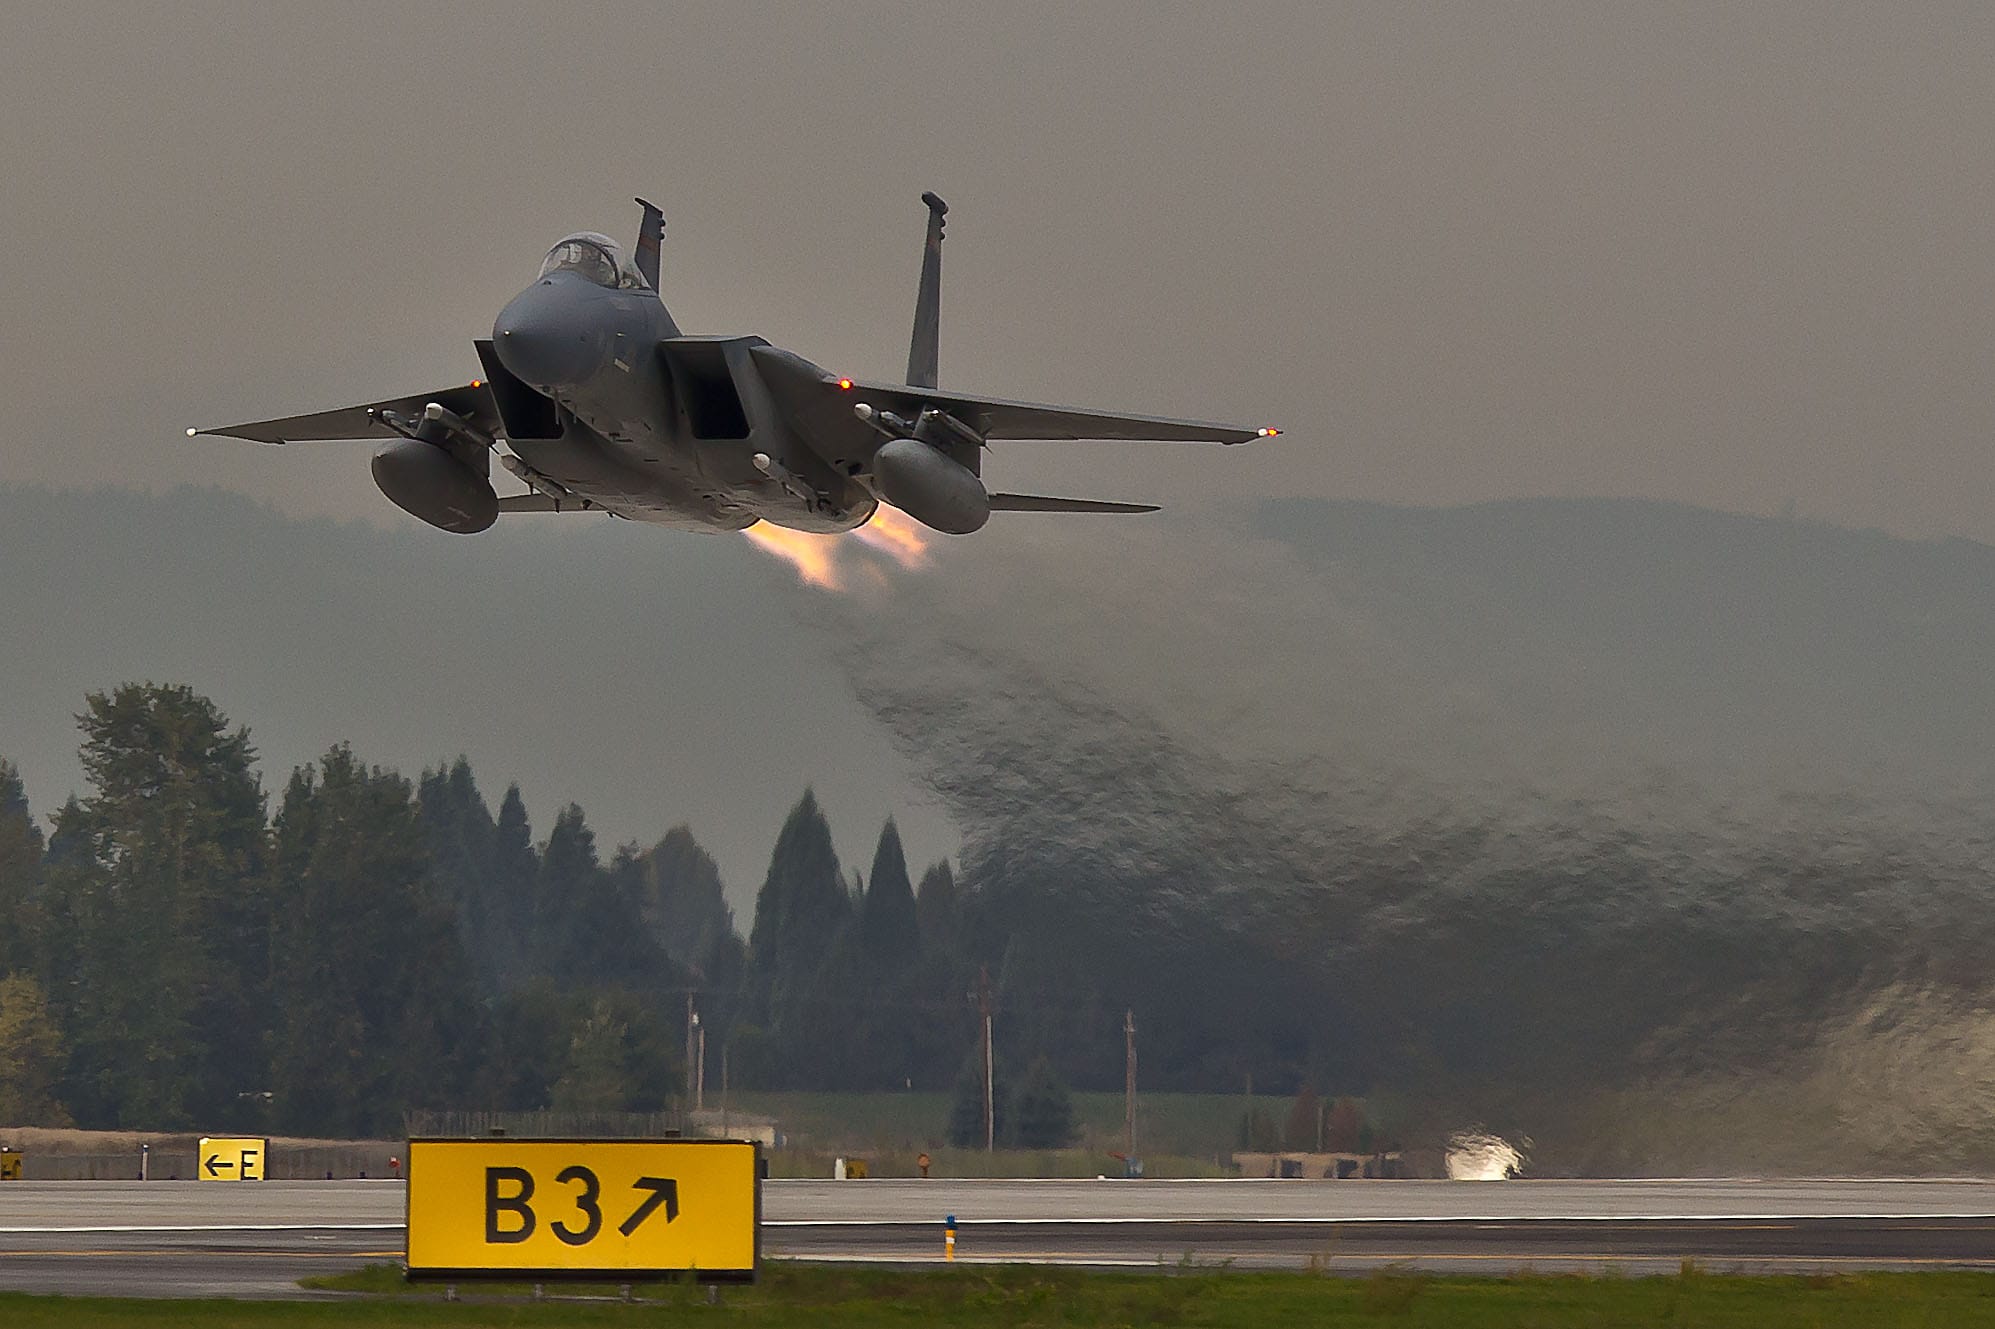 Tonight is the first of four nights where F-15s with the Oregon National Guard will be conducting routine night flying training.